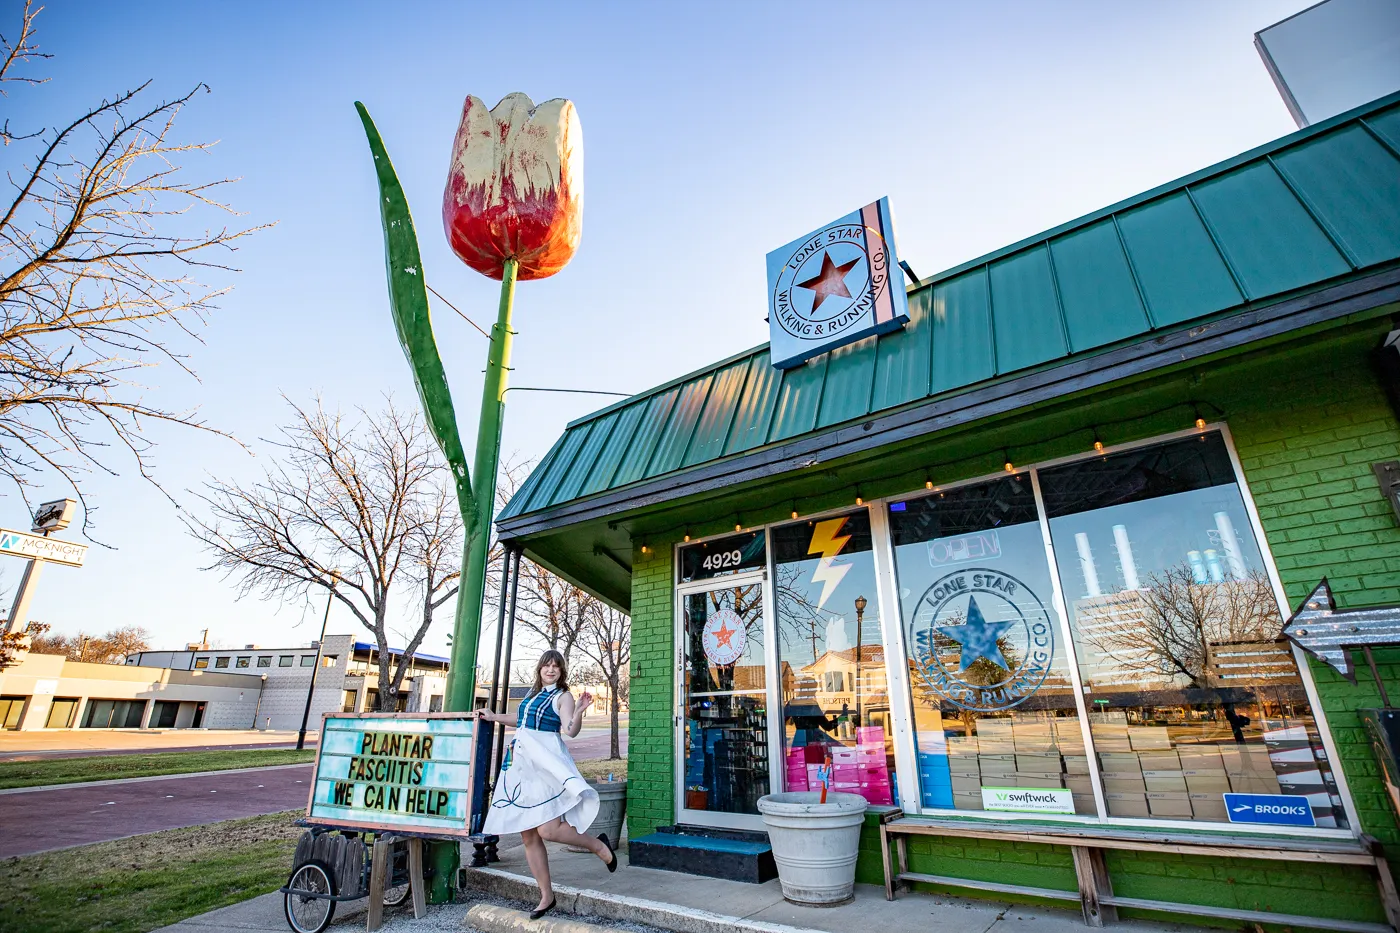 Giant Tulip in Fort Worth, Texas roadside attraction